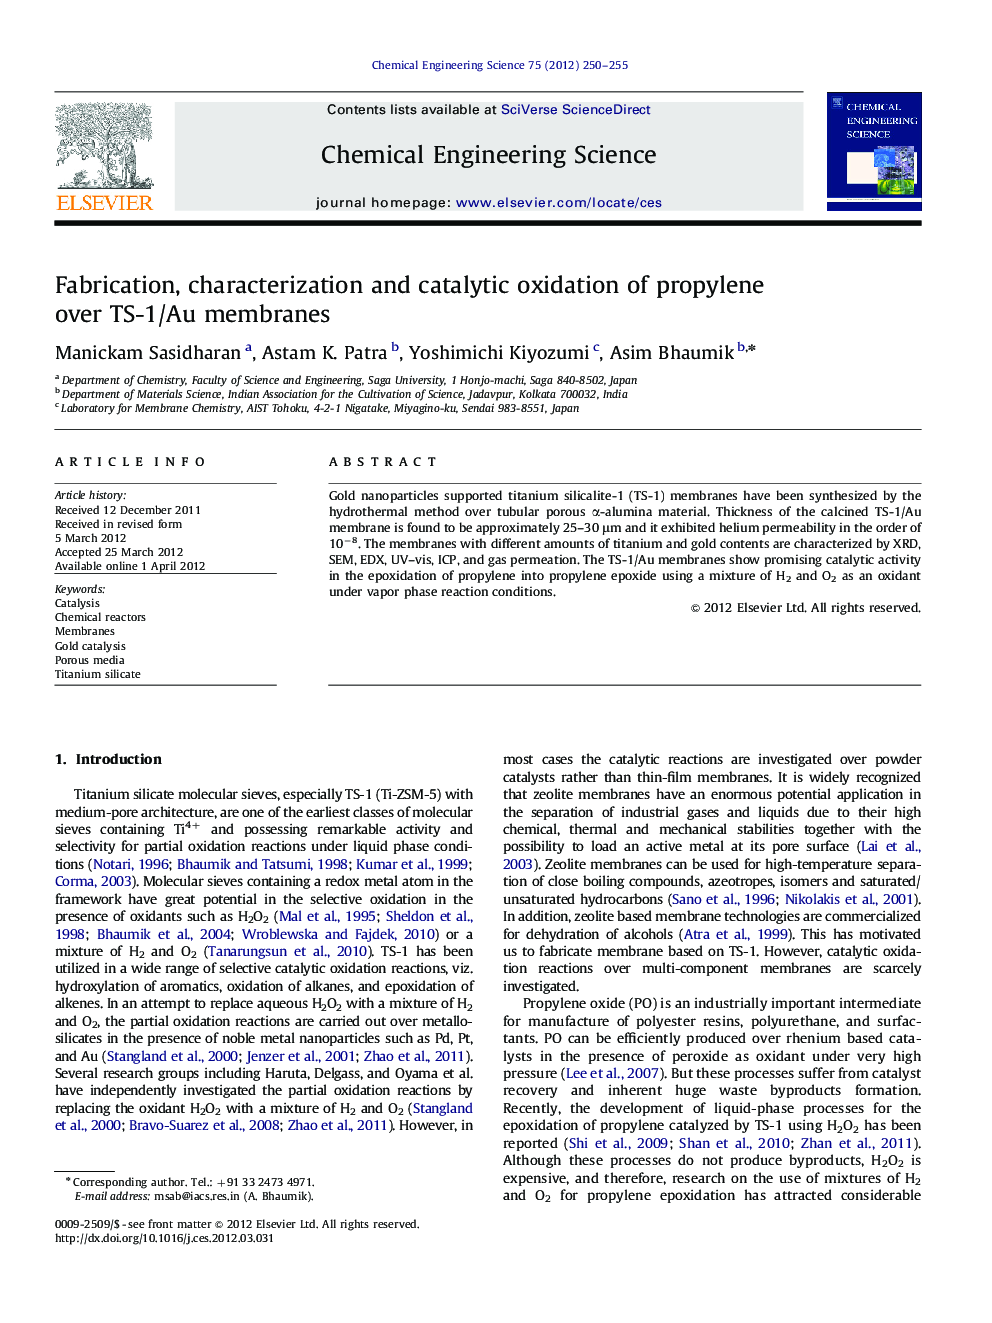 Fabrication, characterization and catalytic oxidation of propylene over TS-1/Au membranes